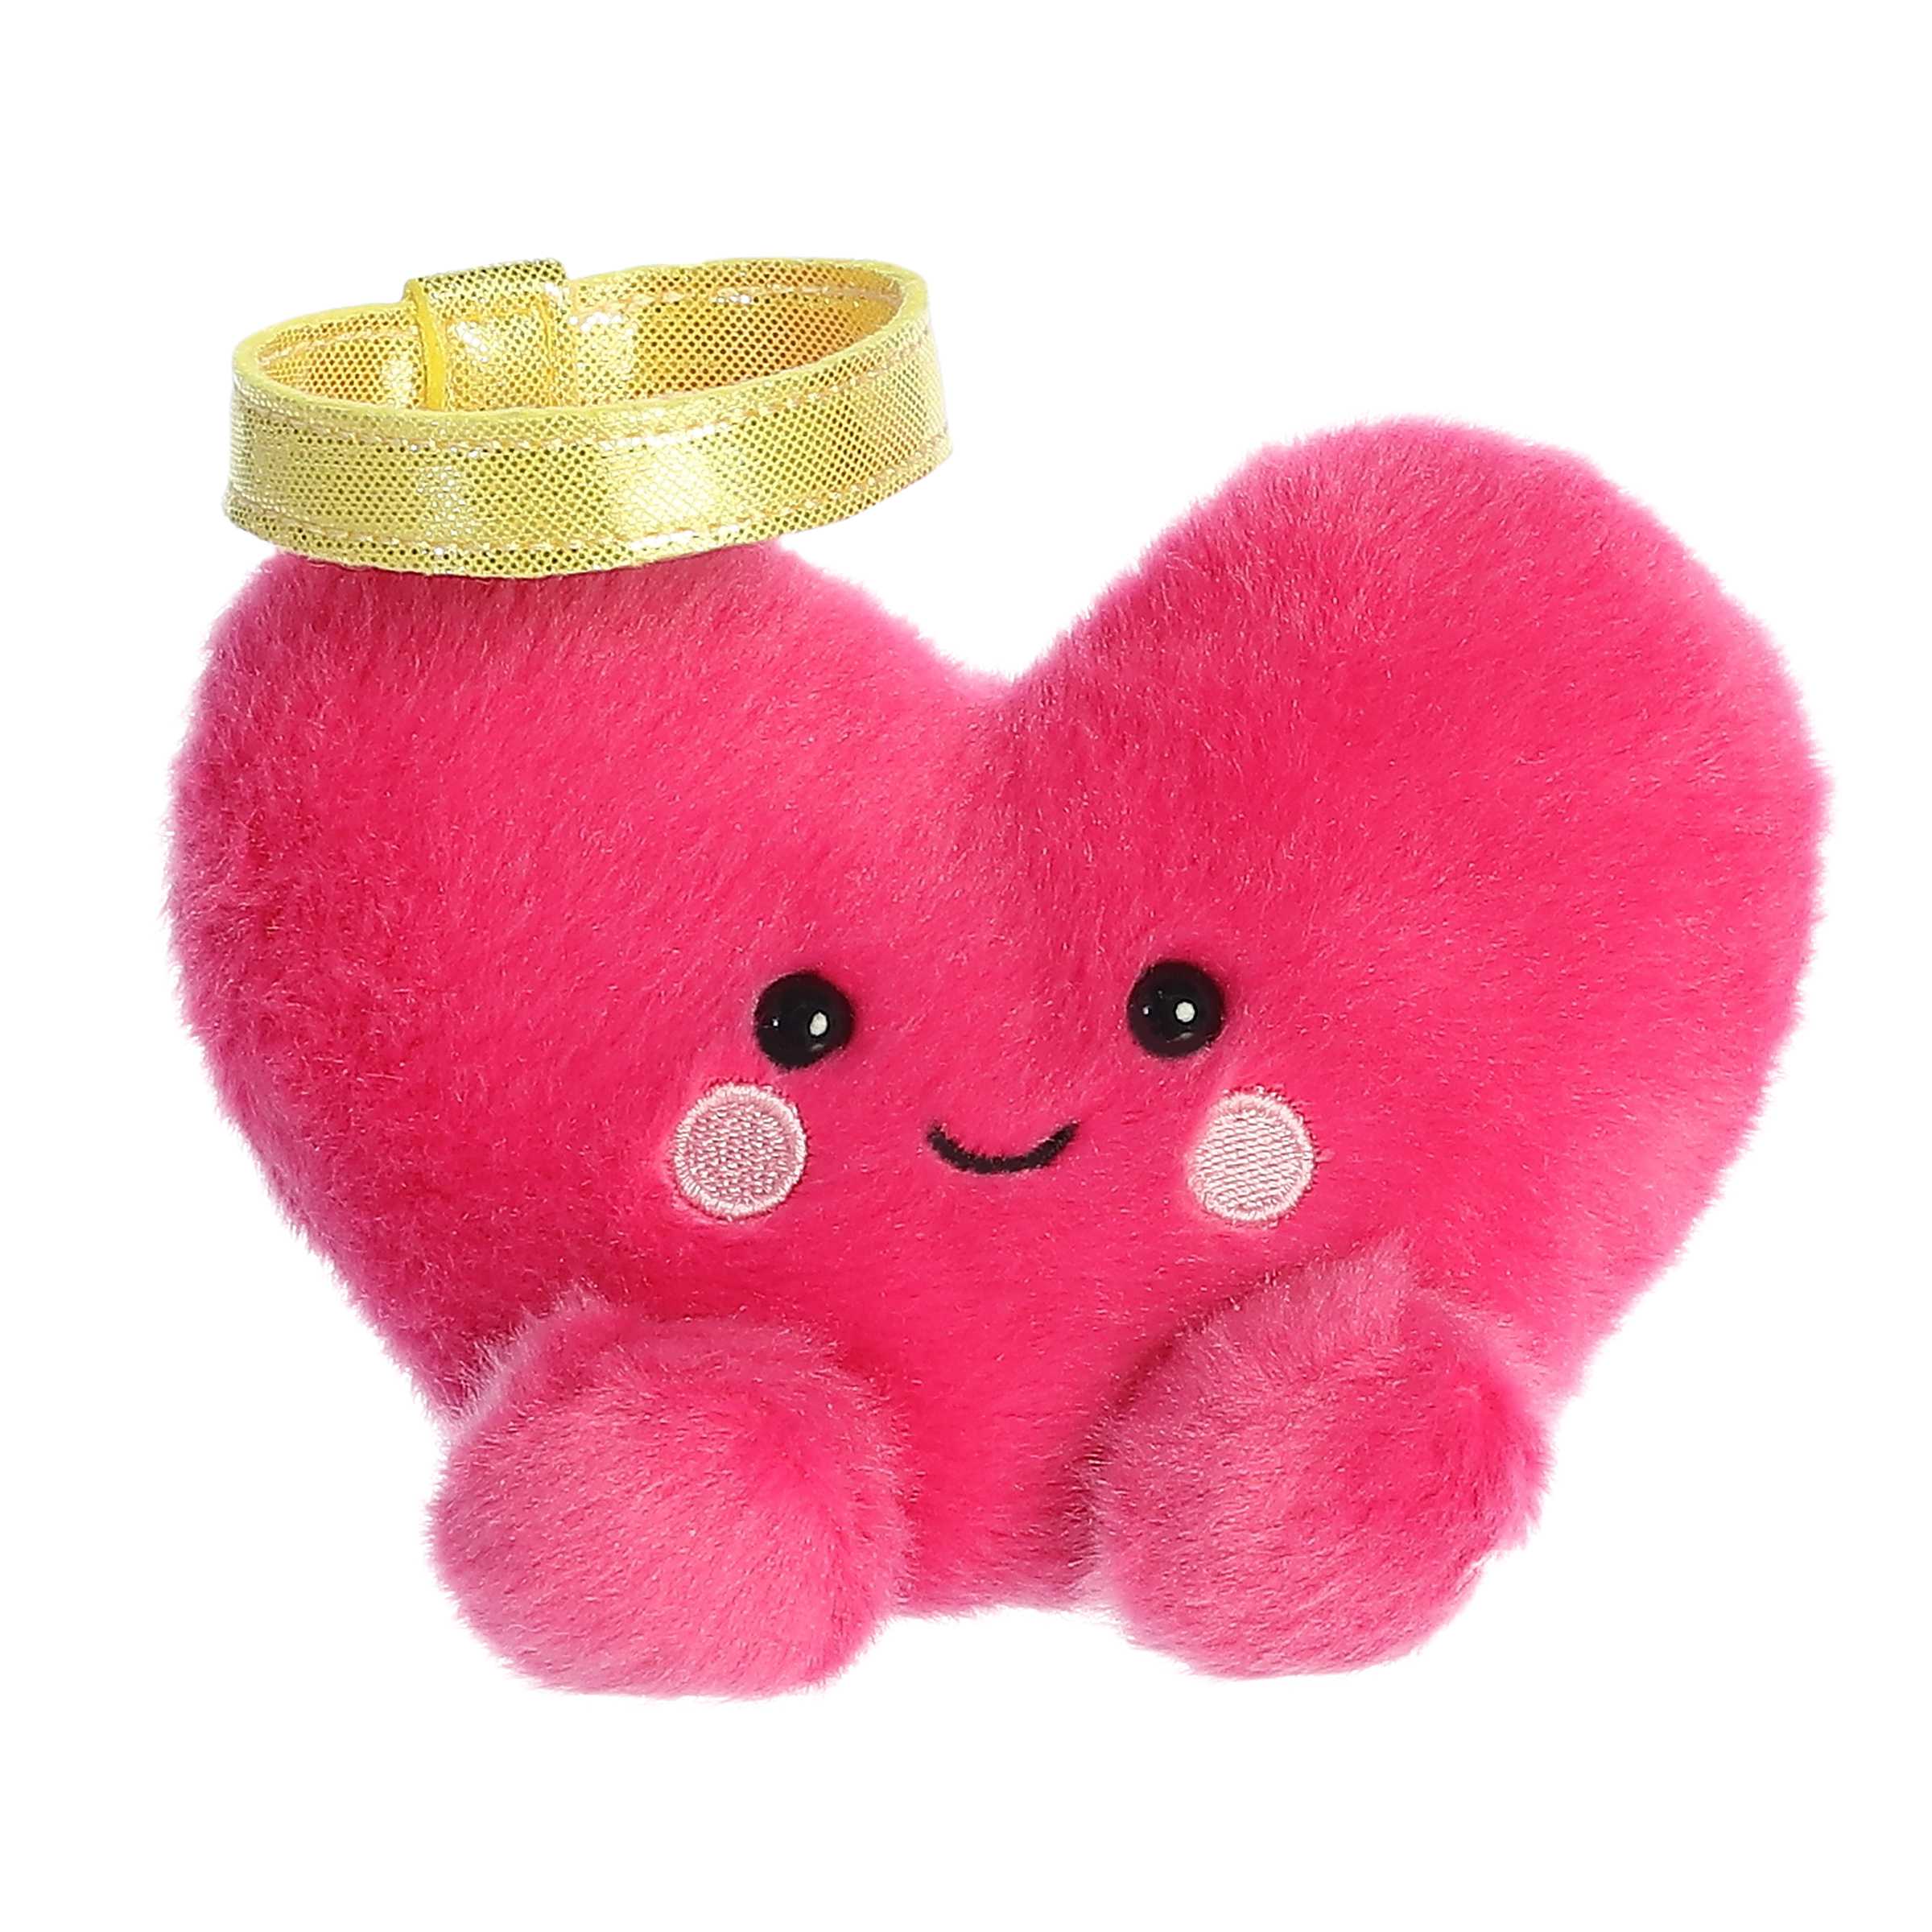 Heart plush from Palm Pals, Valentine's Day edition, with a blush body and gold halo, symbolizing love and grace.